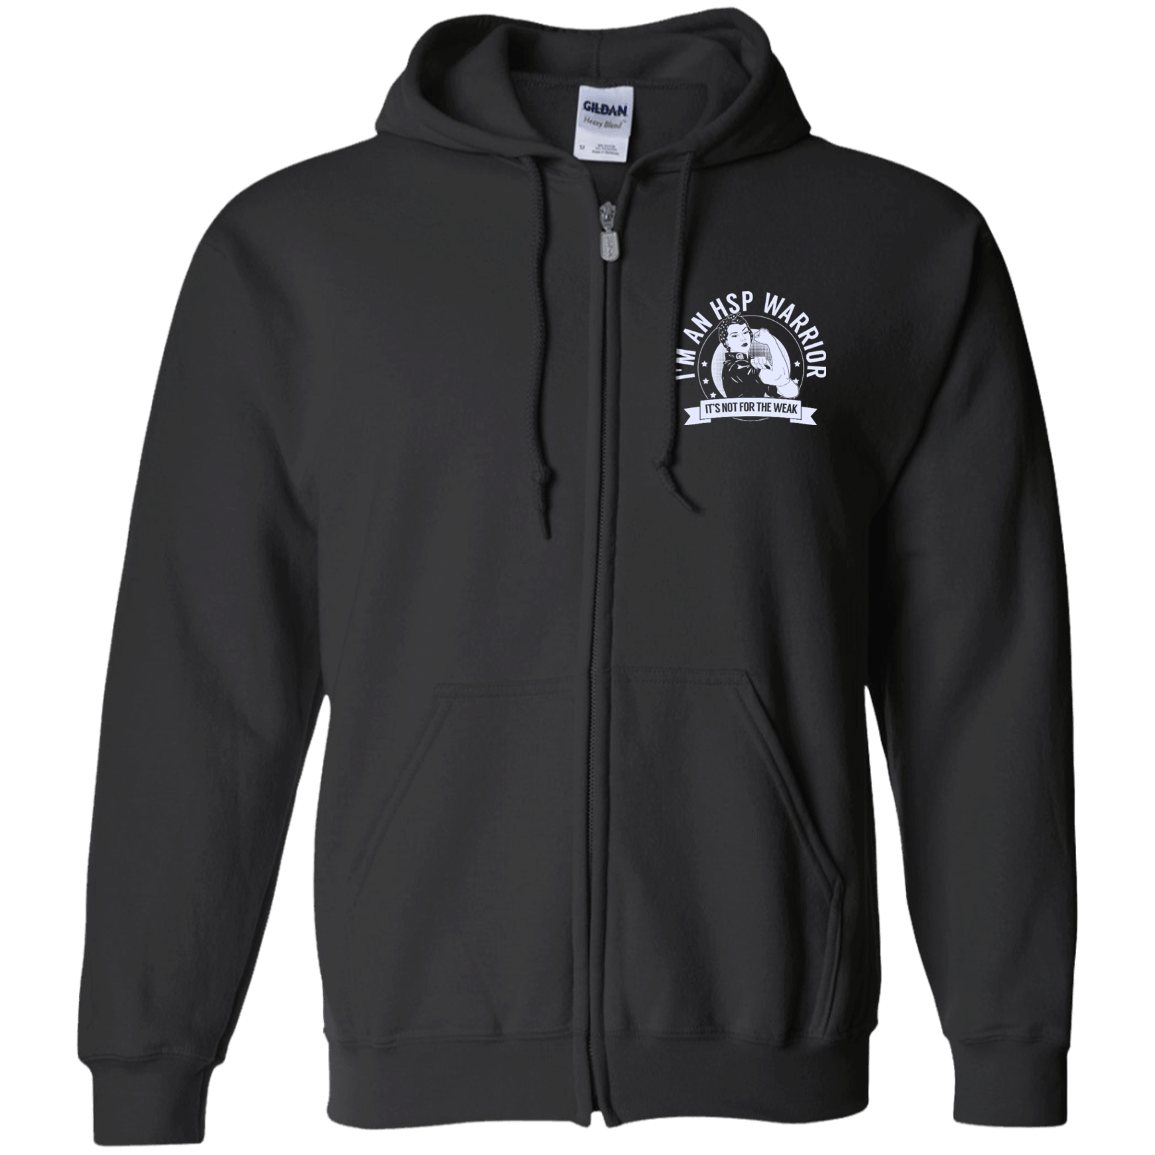 Hereditary Spastic Paraparesis - HSP Warrior Not For The Weak Zip Up Hooded Sweatshirt - The Unchargeables